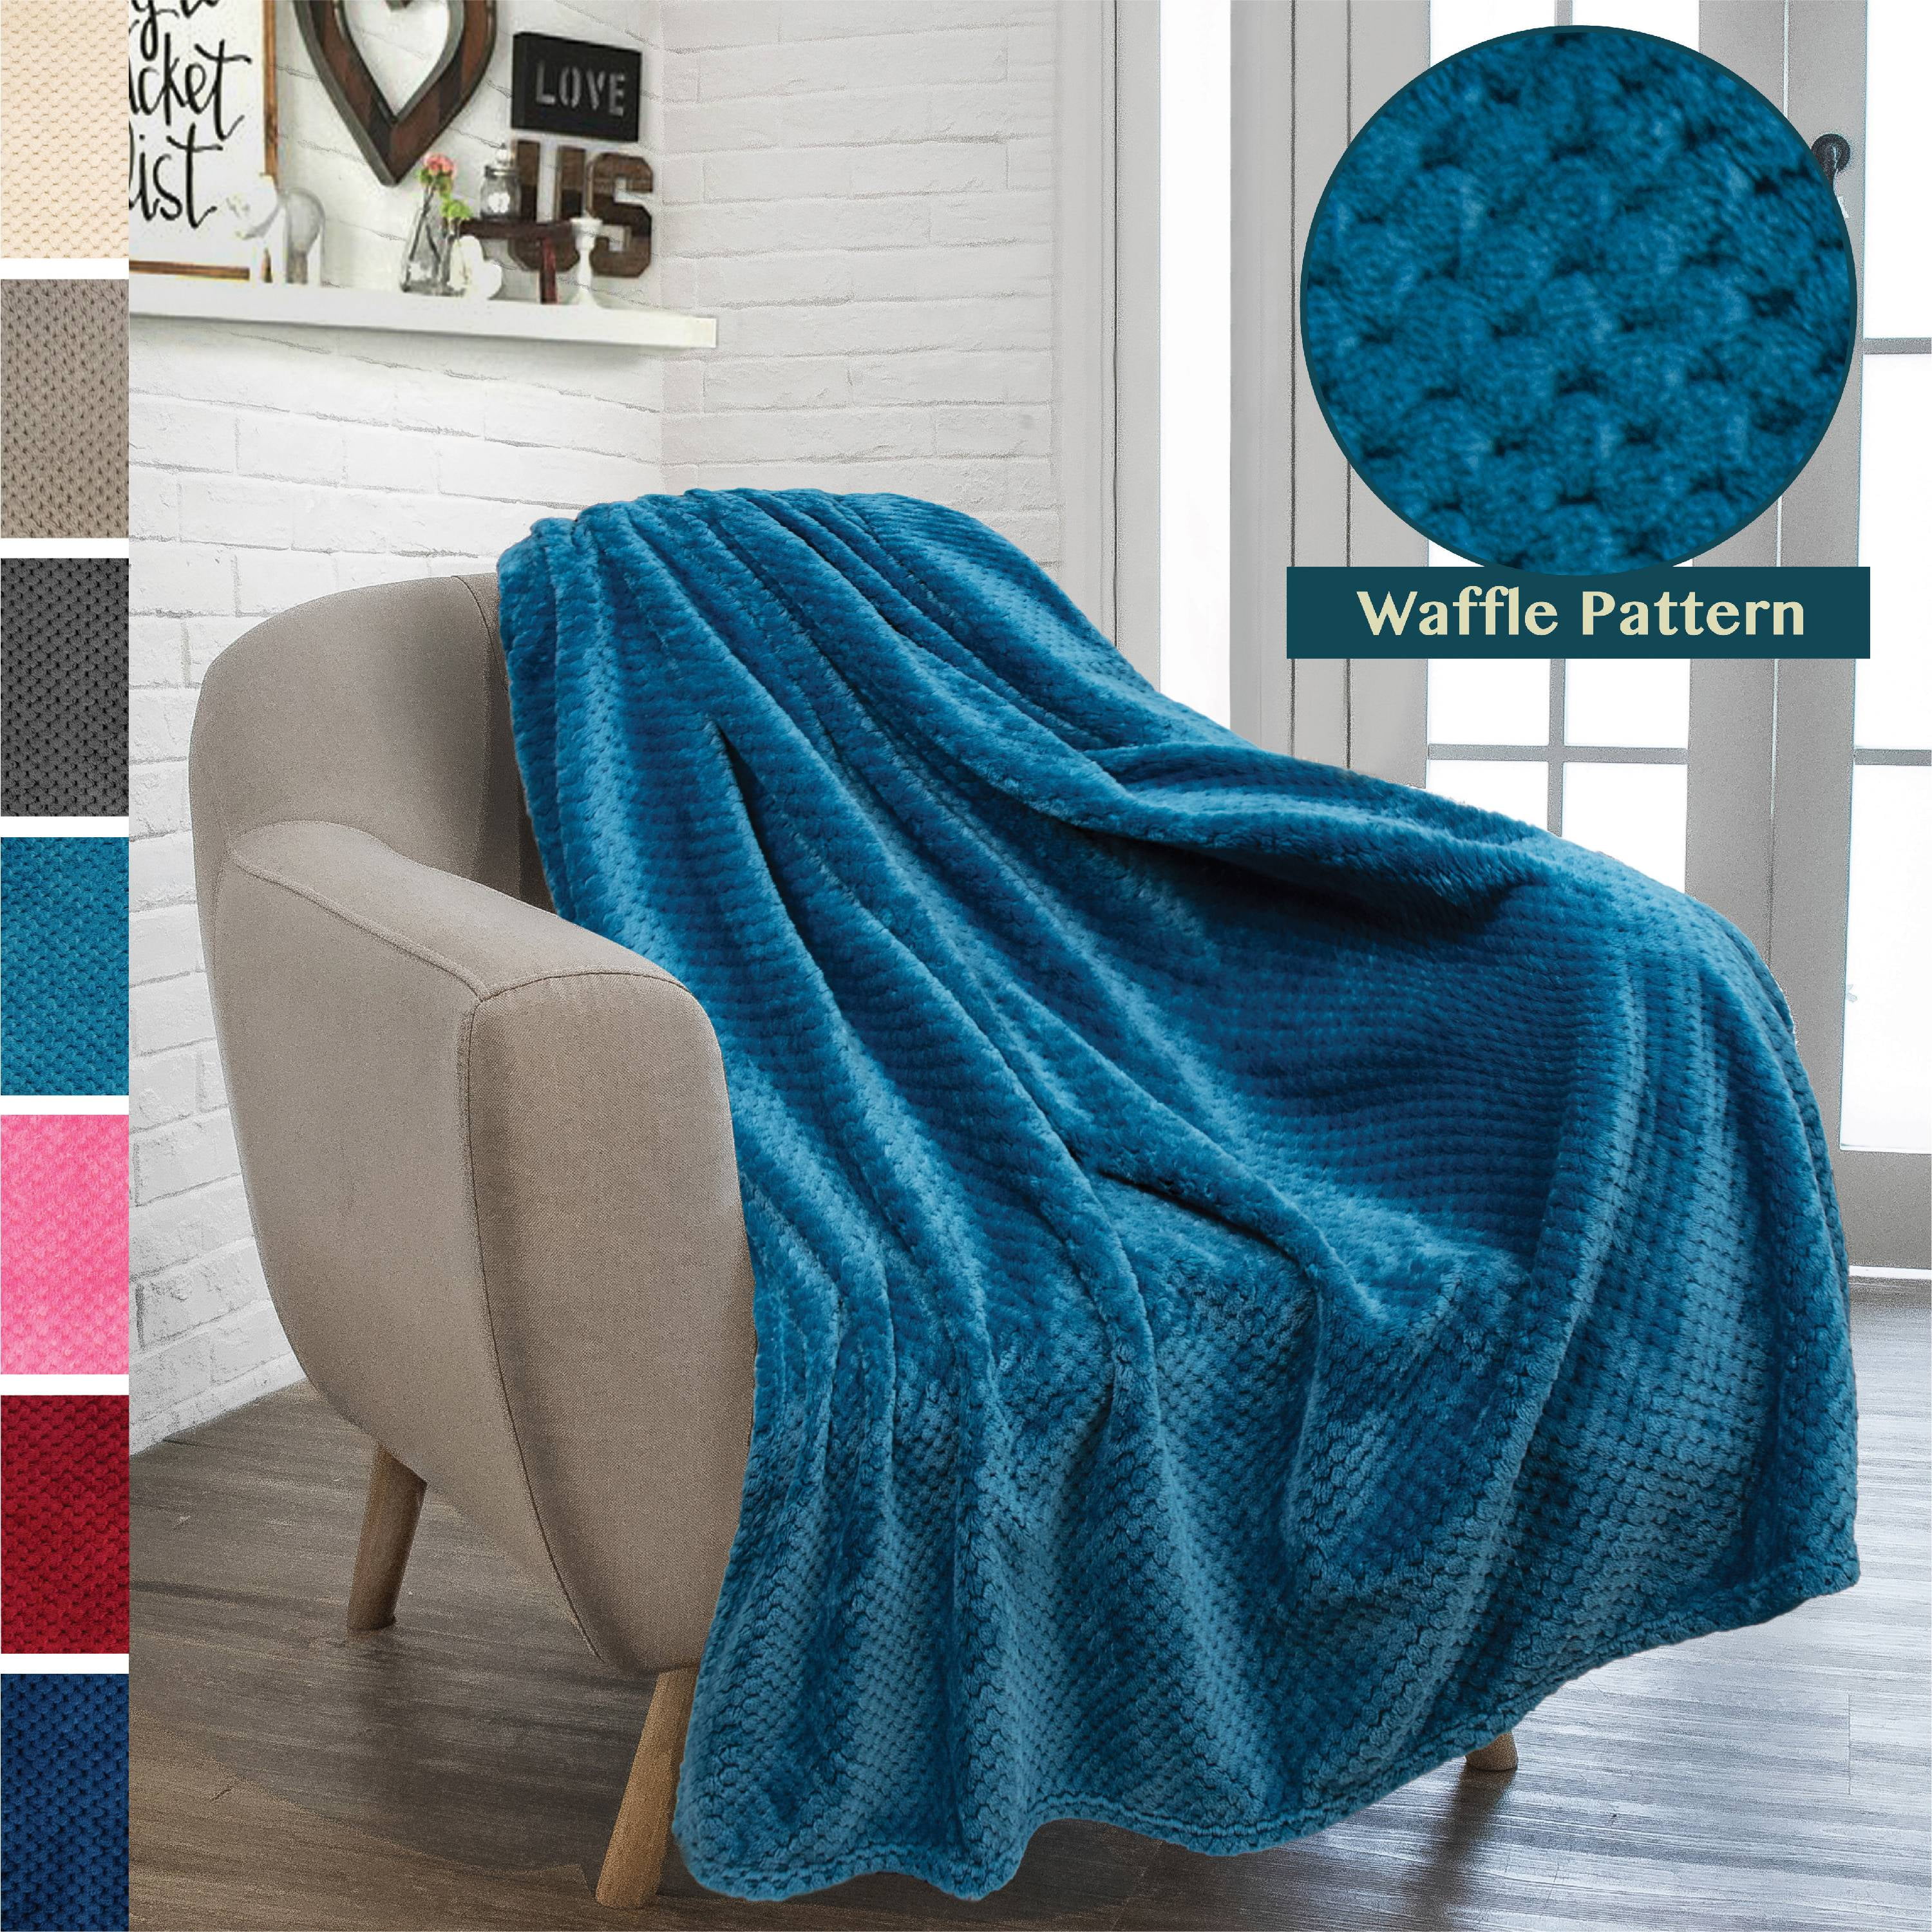 Flannel Fleece Soft Blankets All Season 40x50inch Sea Turles Ocean Animal Warm Lightweight Luxury Microfiber Throws Rustic Wood Beach Natural HELLOWINK Throw Blankets for Couch Bed Sofa 